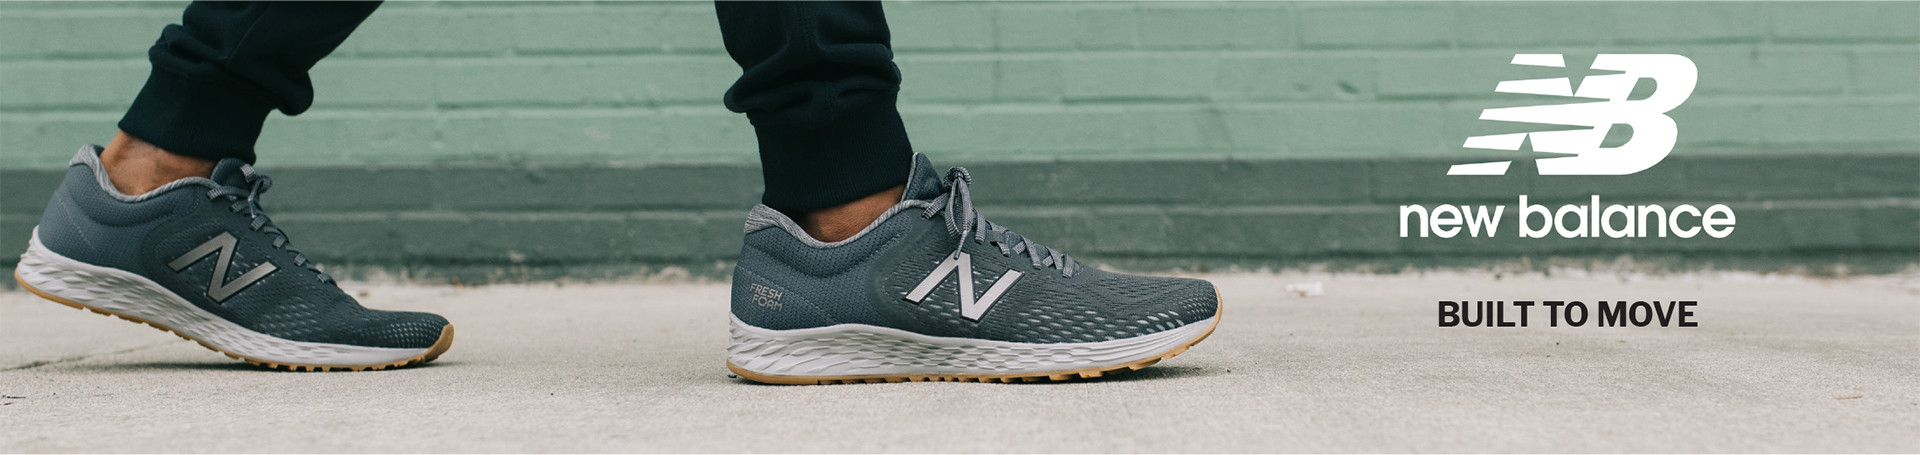 New Balance Big and Tall Men's Shoes 